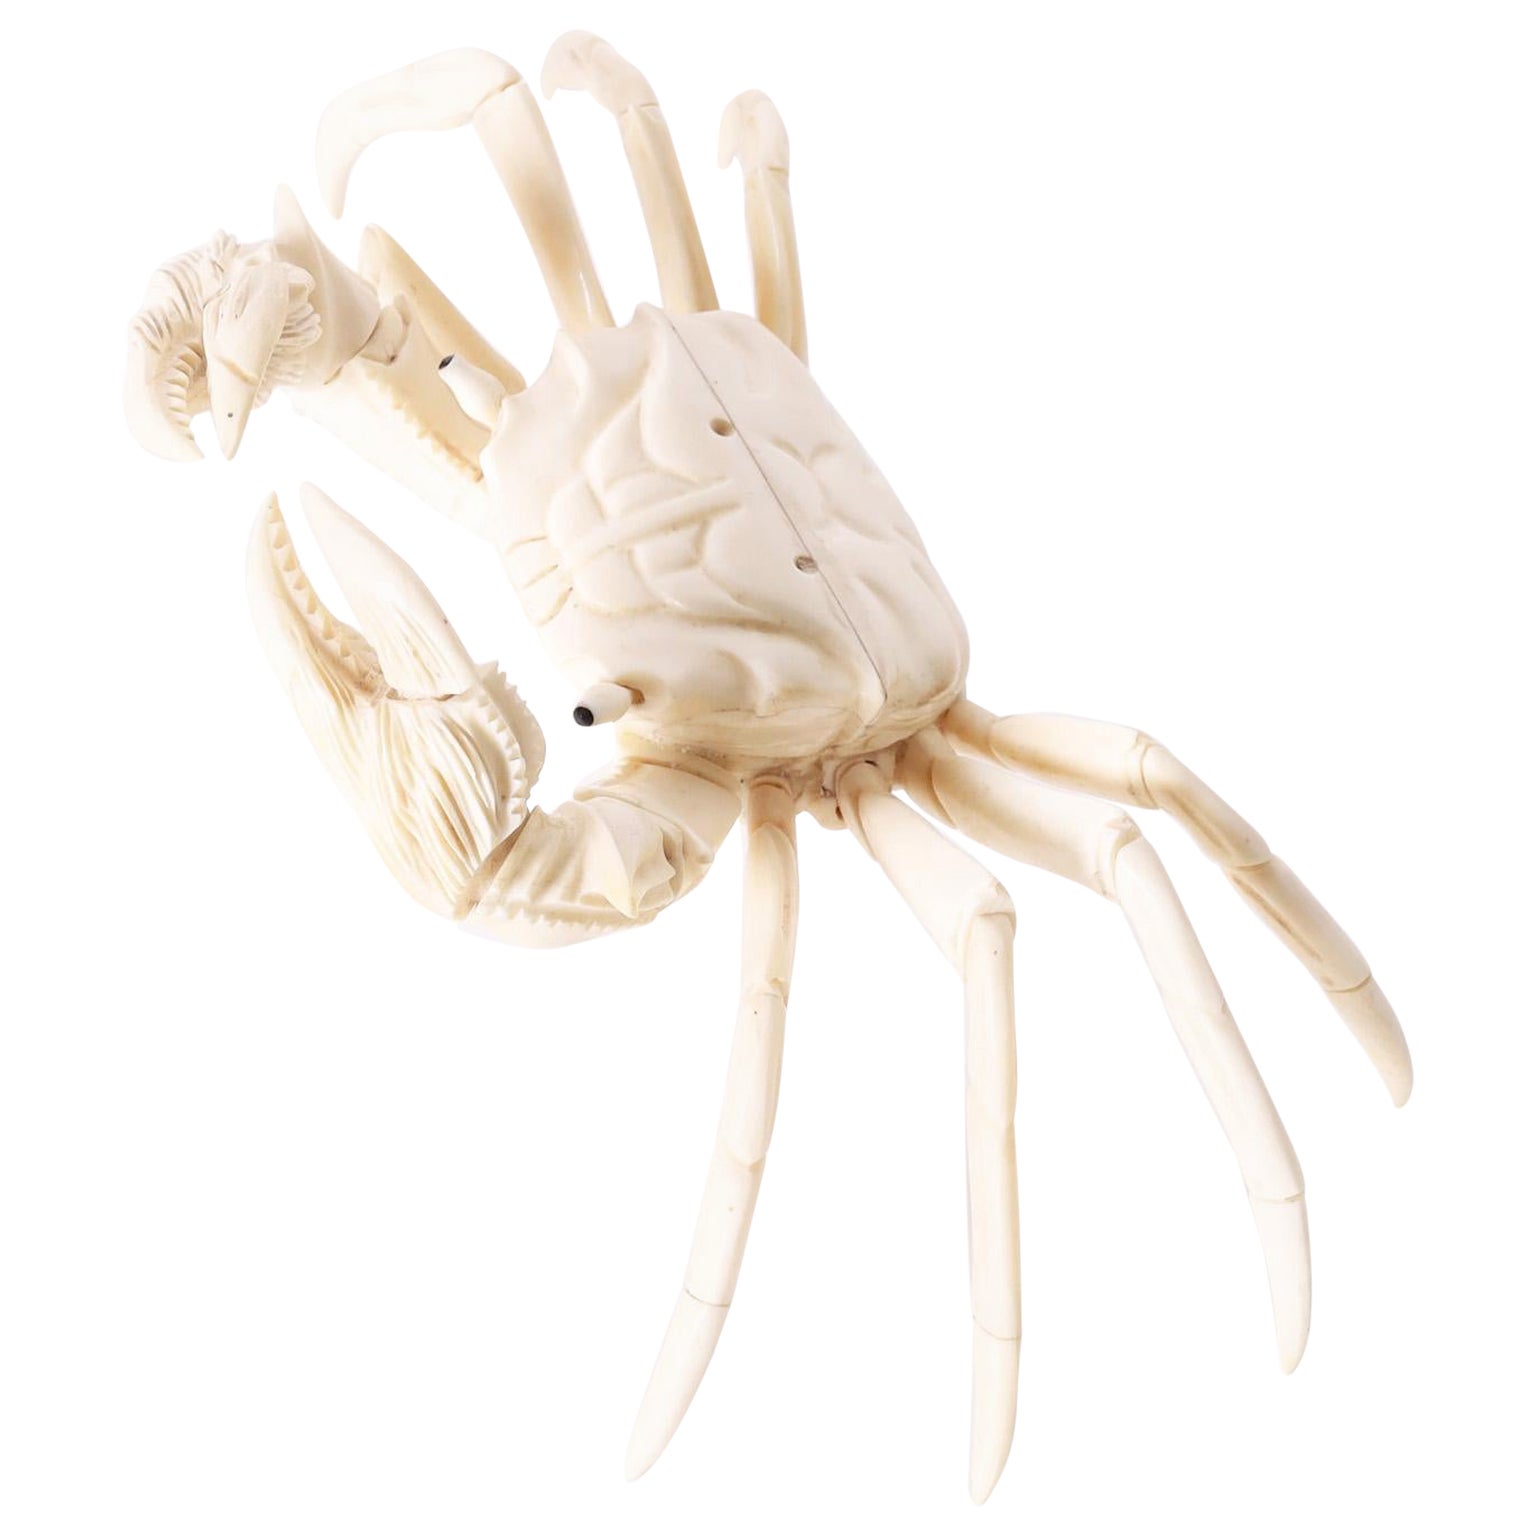 Carved Bone Crab For Sale